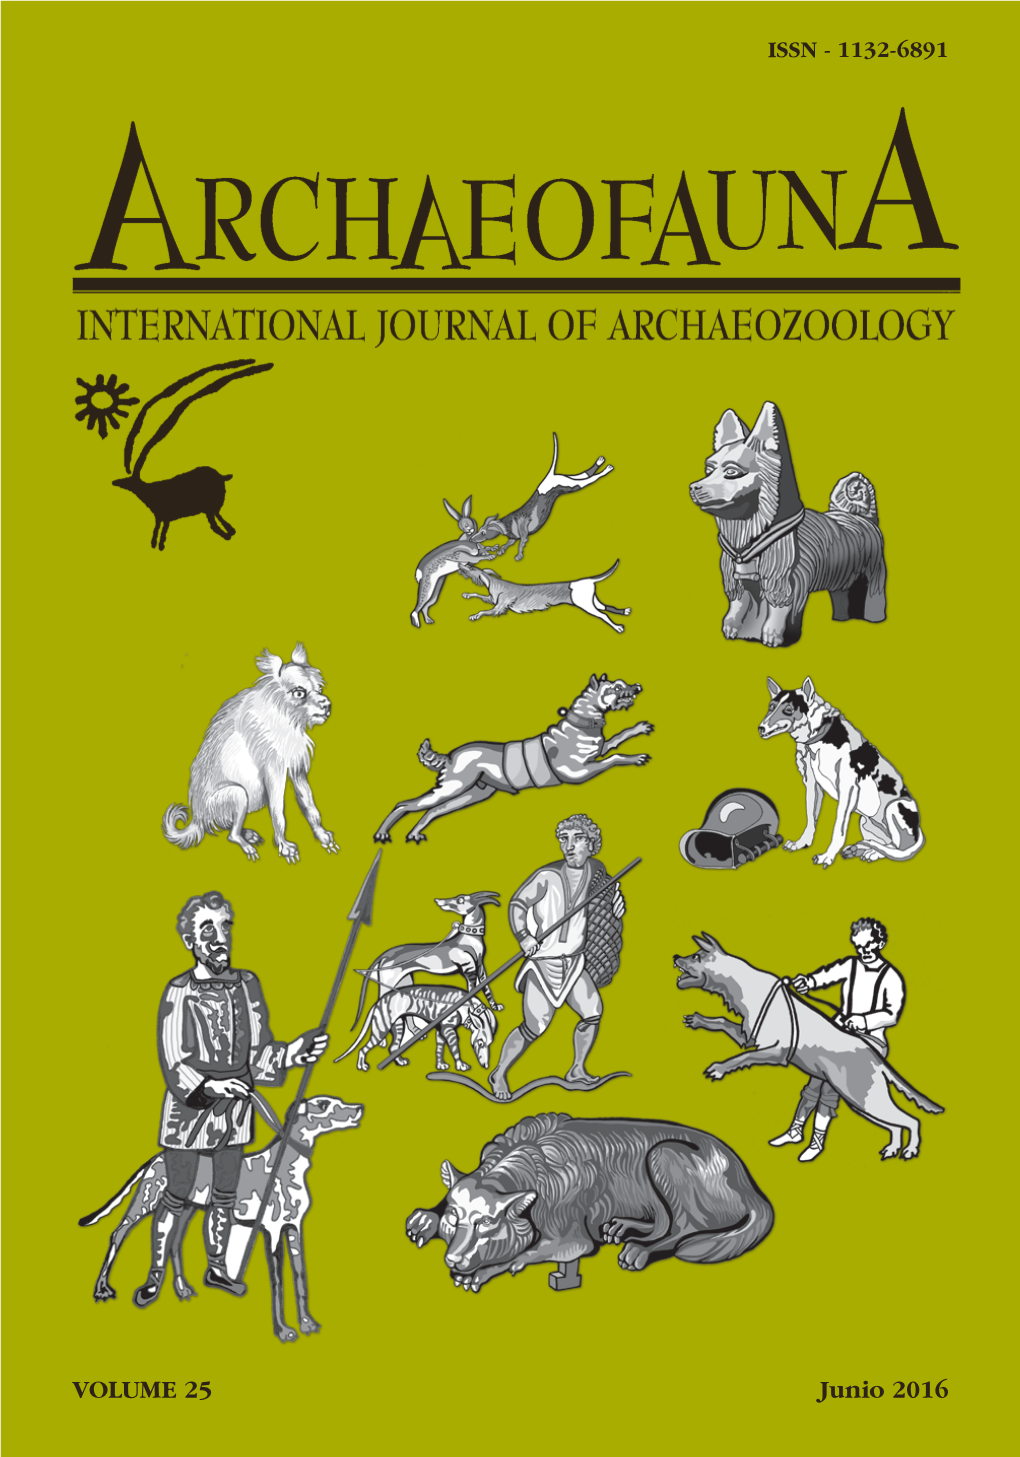 The Dogs of Roman Vindolanda, Part I: Morphometric Techniques Useful in Differentiating Domestic and Wild Canids